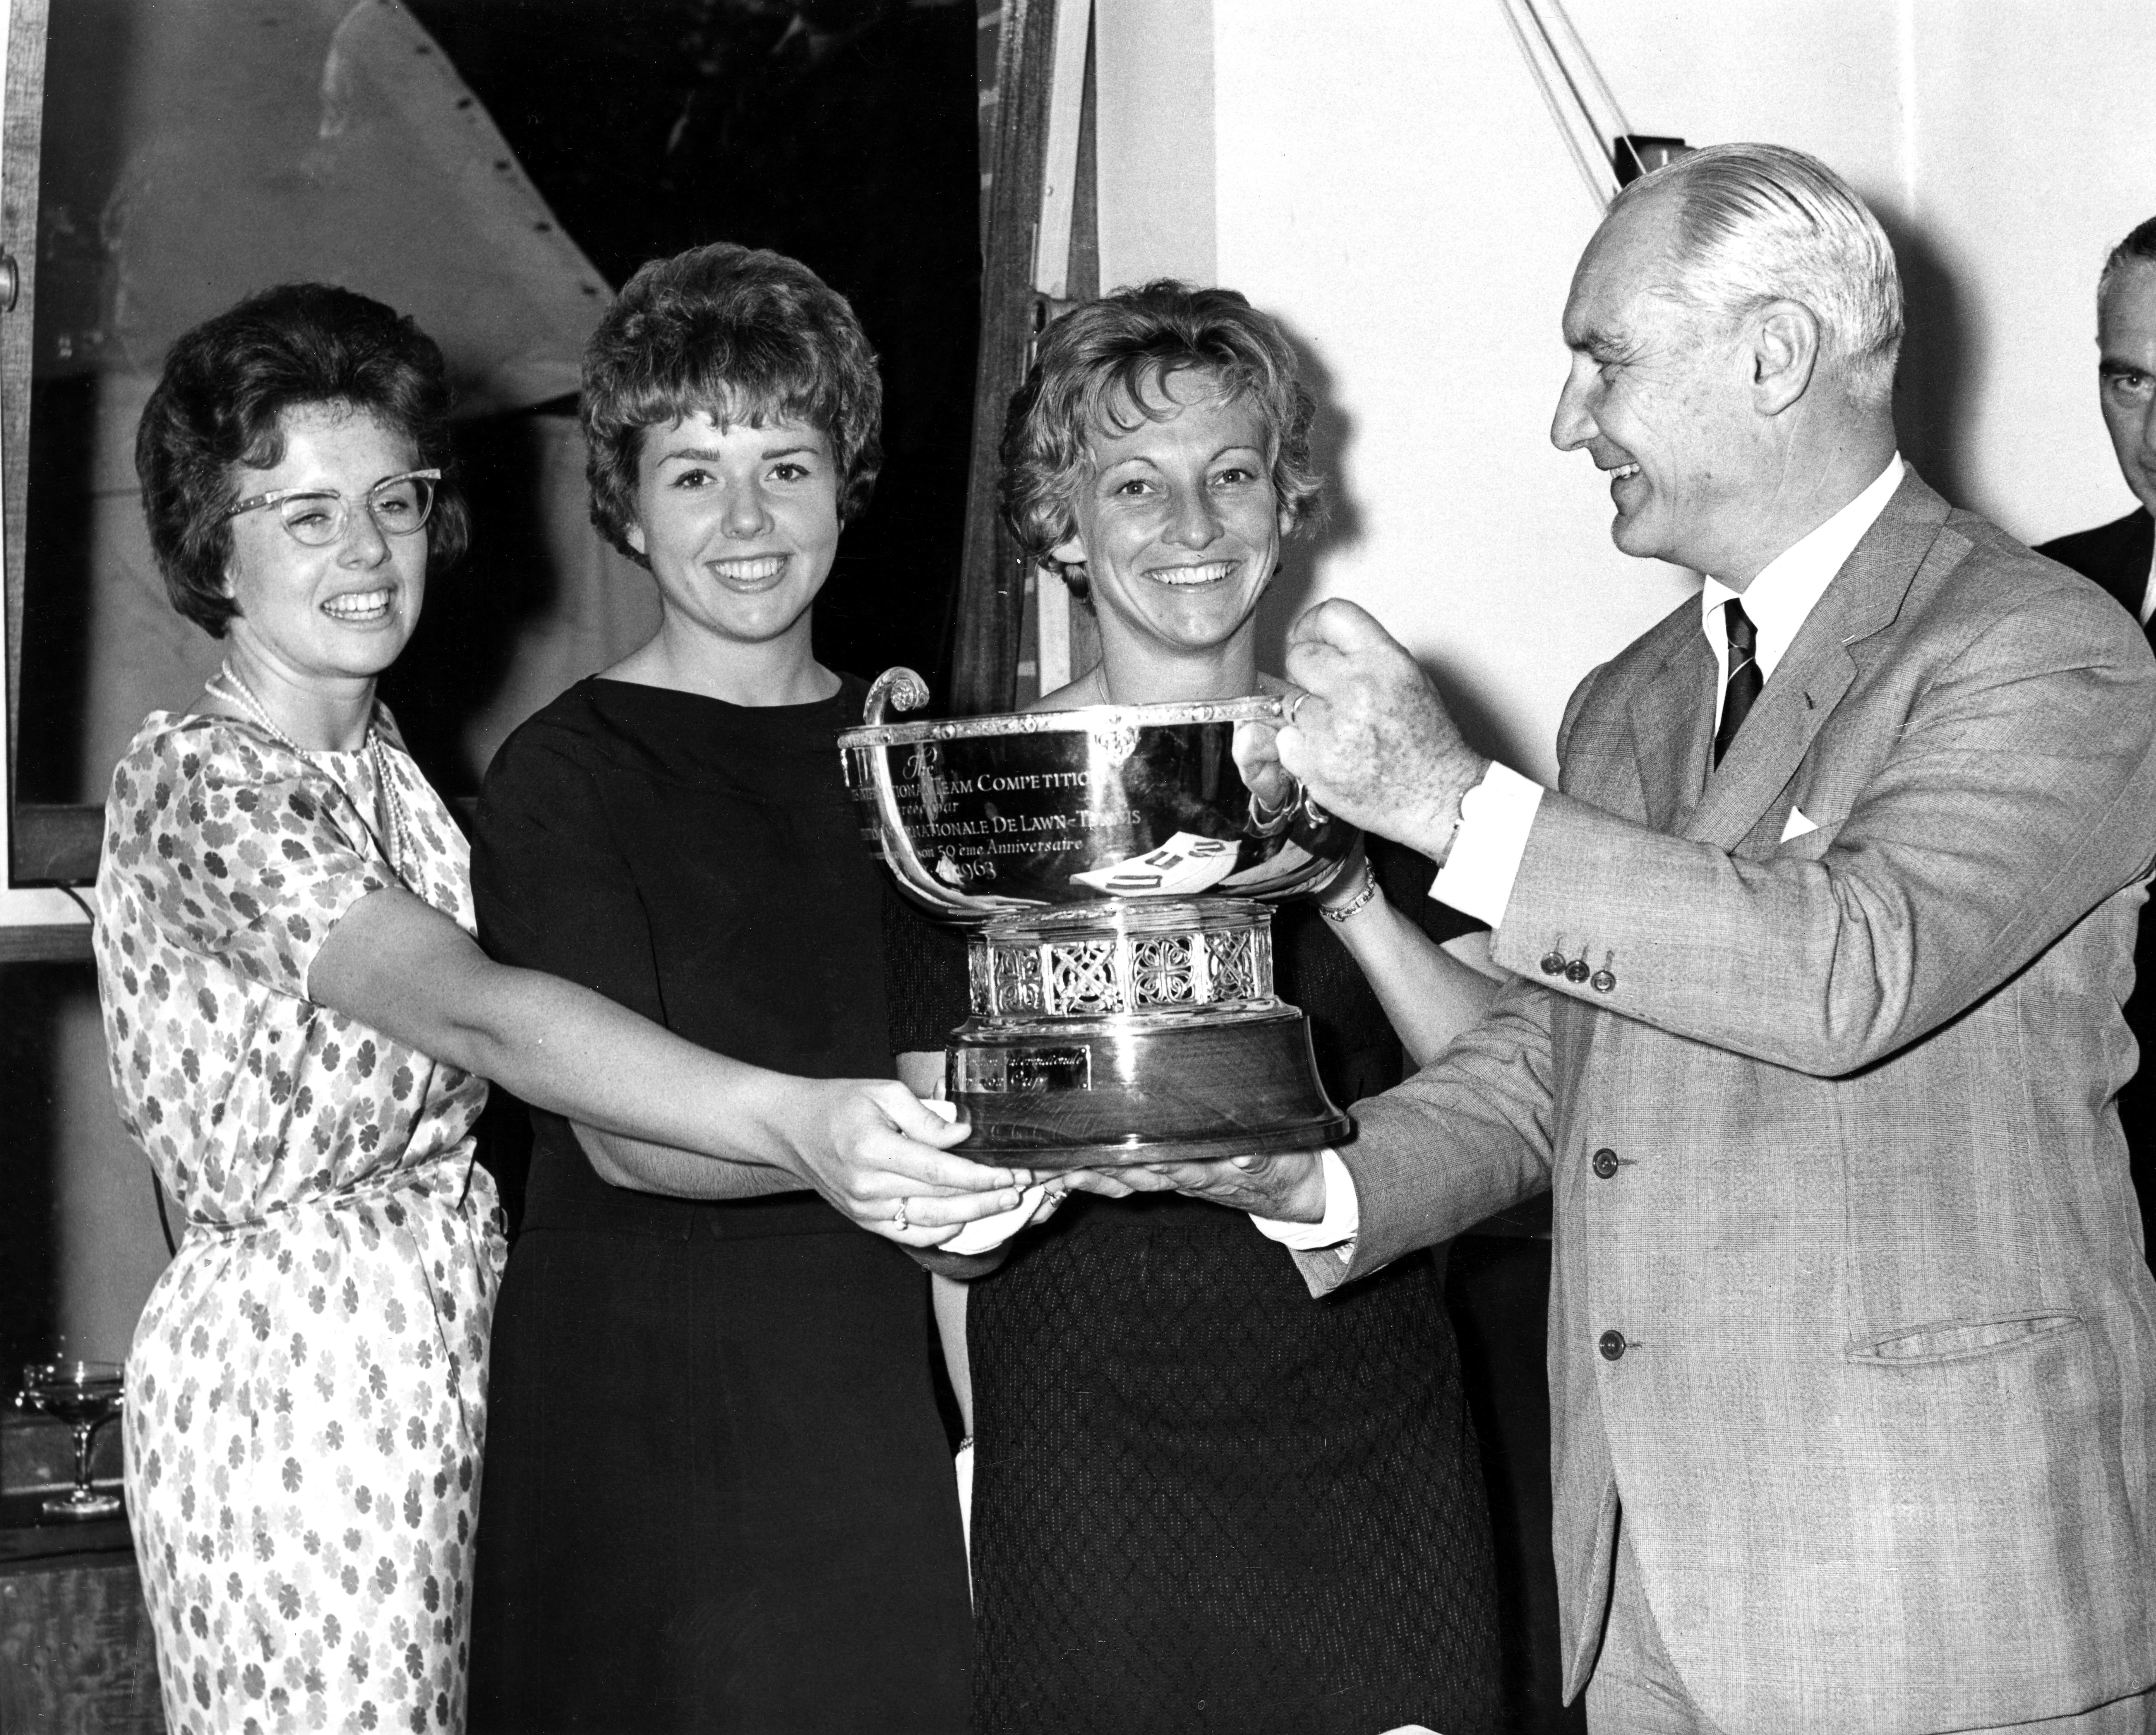 Billie Jean King, left, was part of the winning team at the first edition of the Fed Cup in 1963